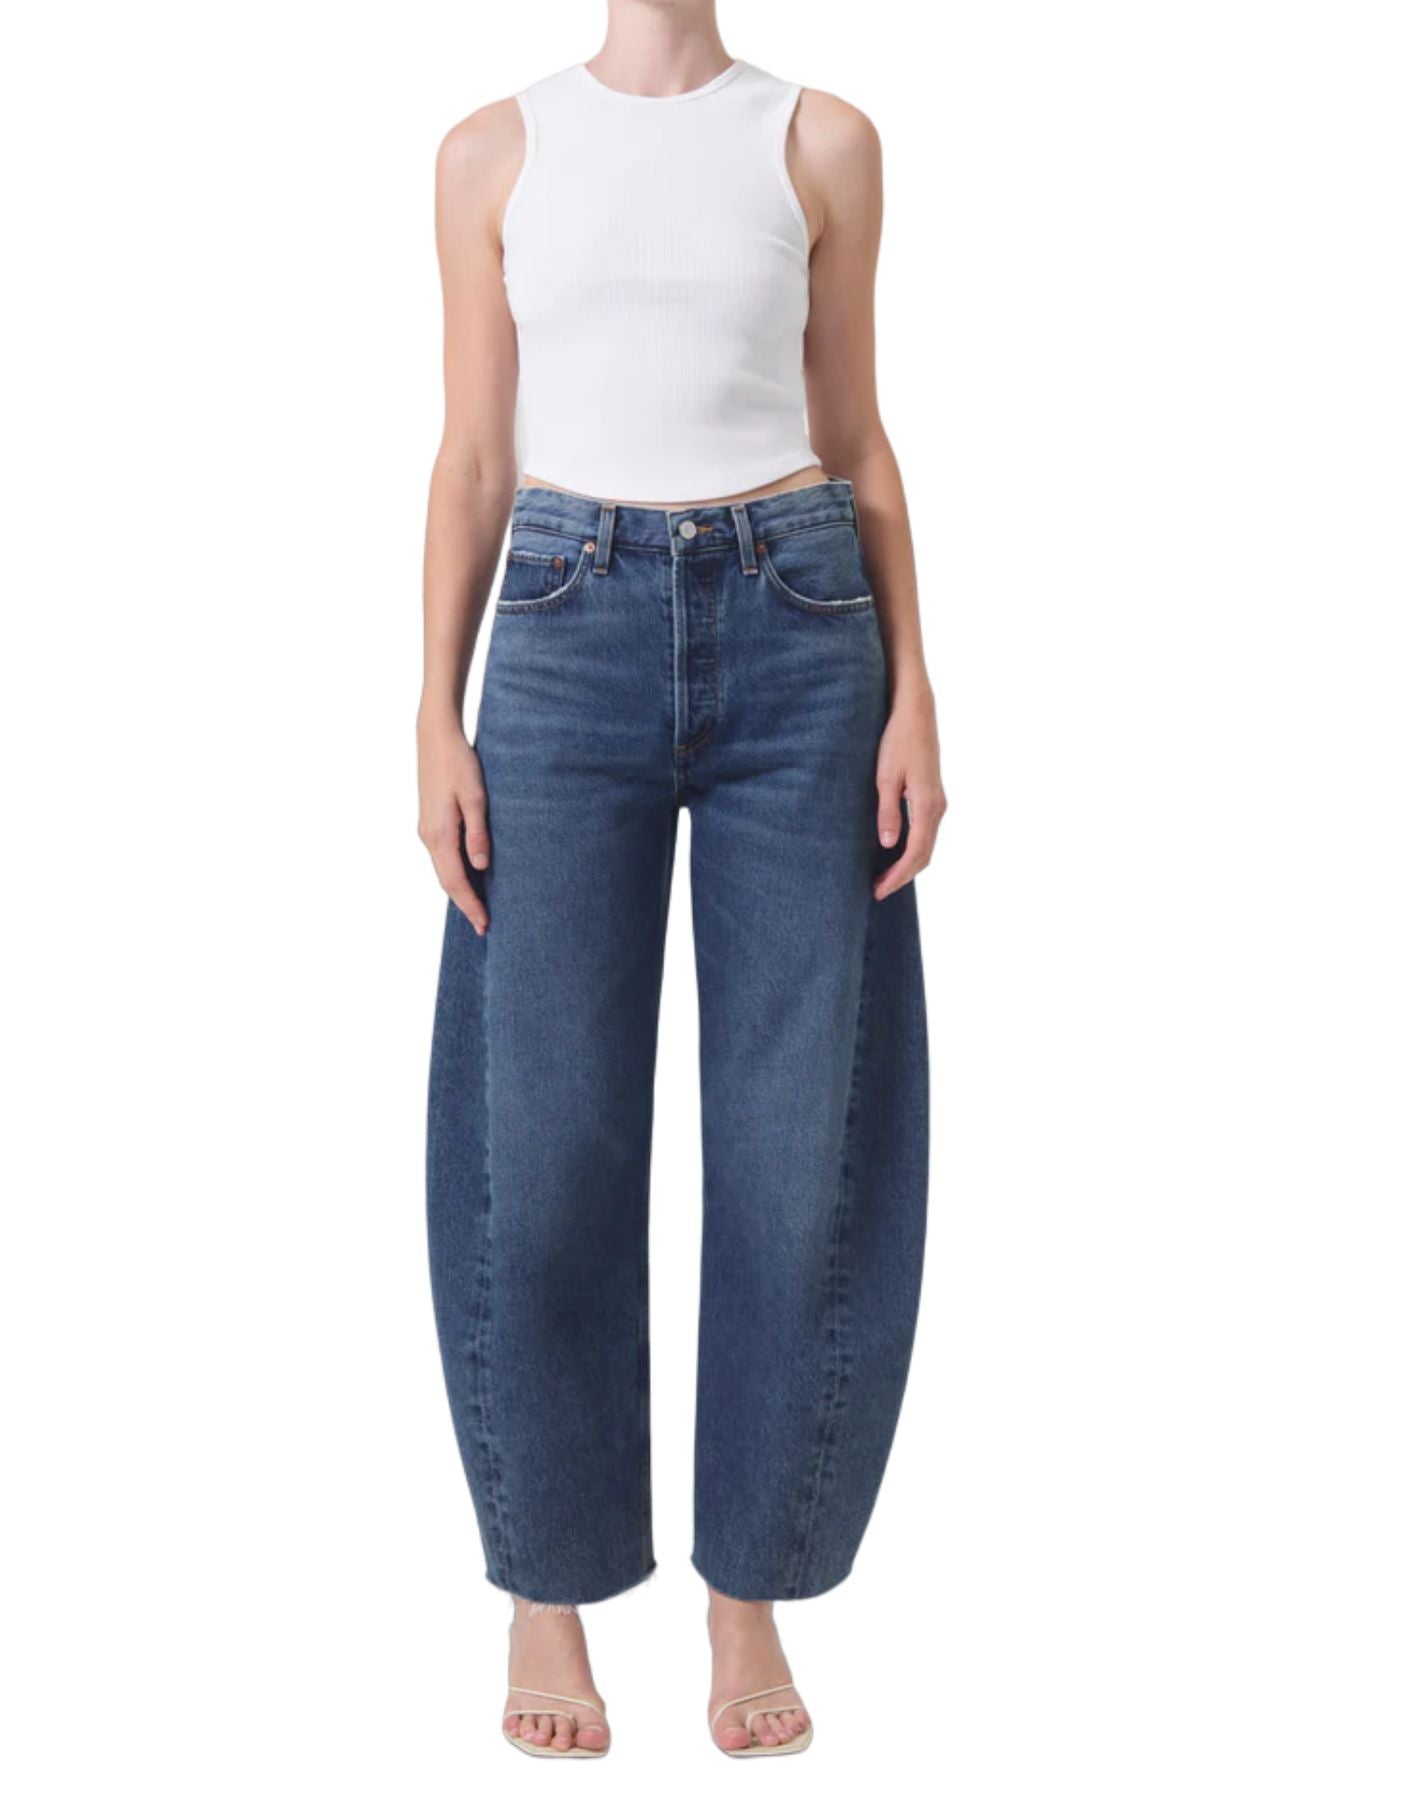 Jeans Woman A9039 1206 Control Agolde